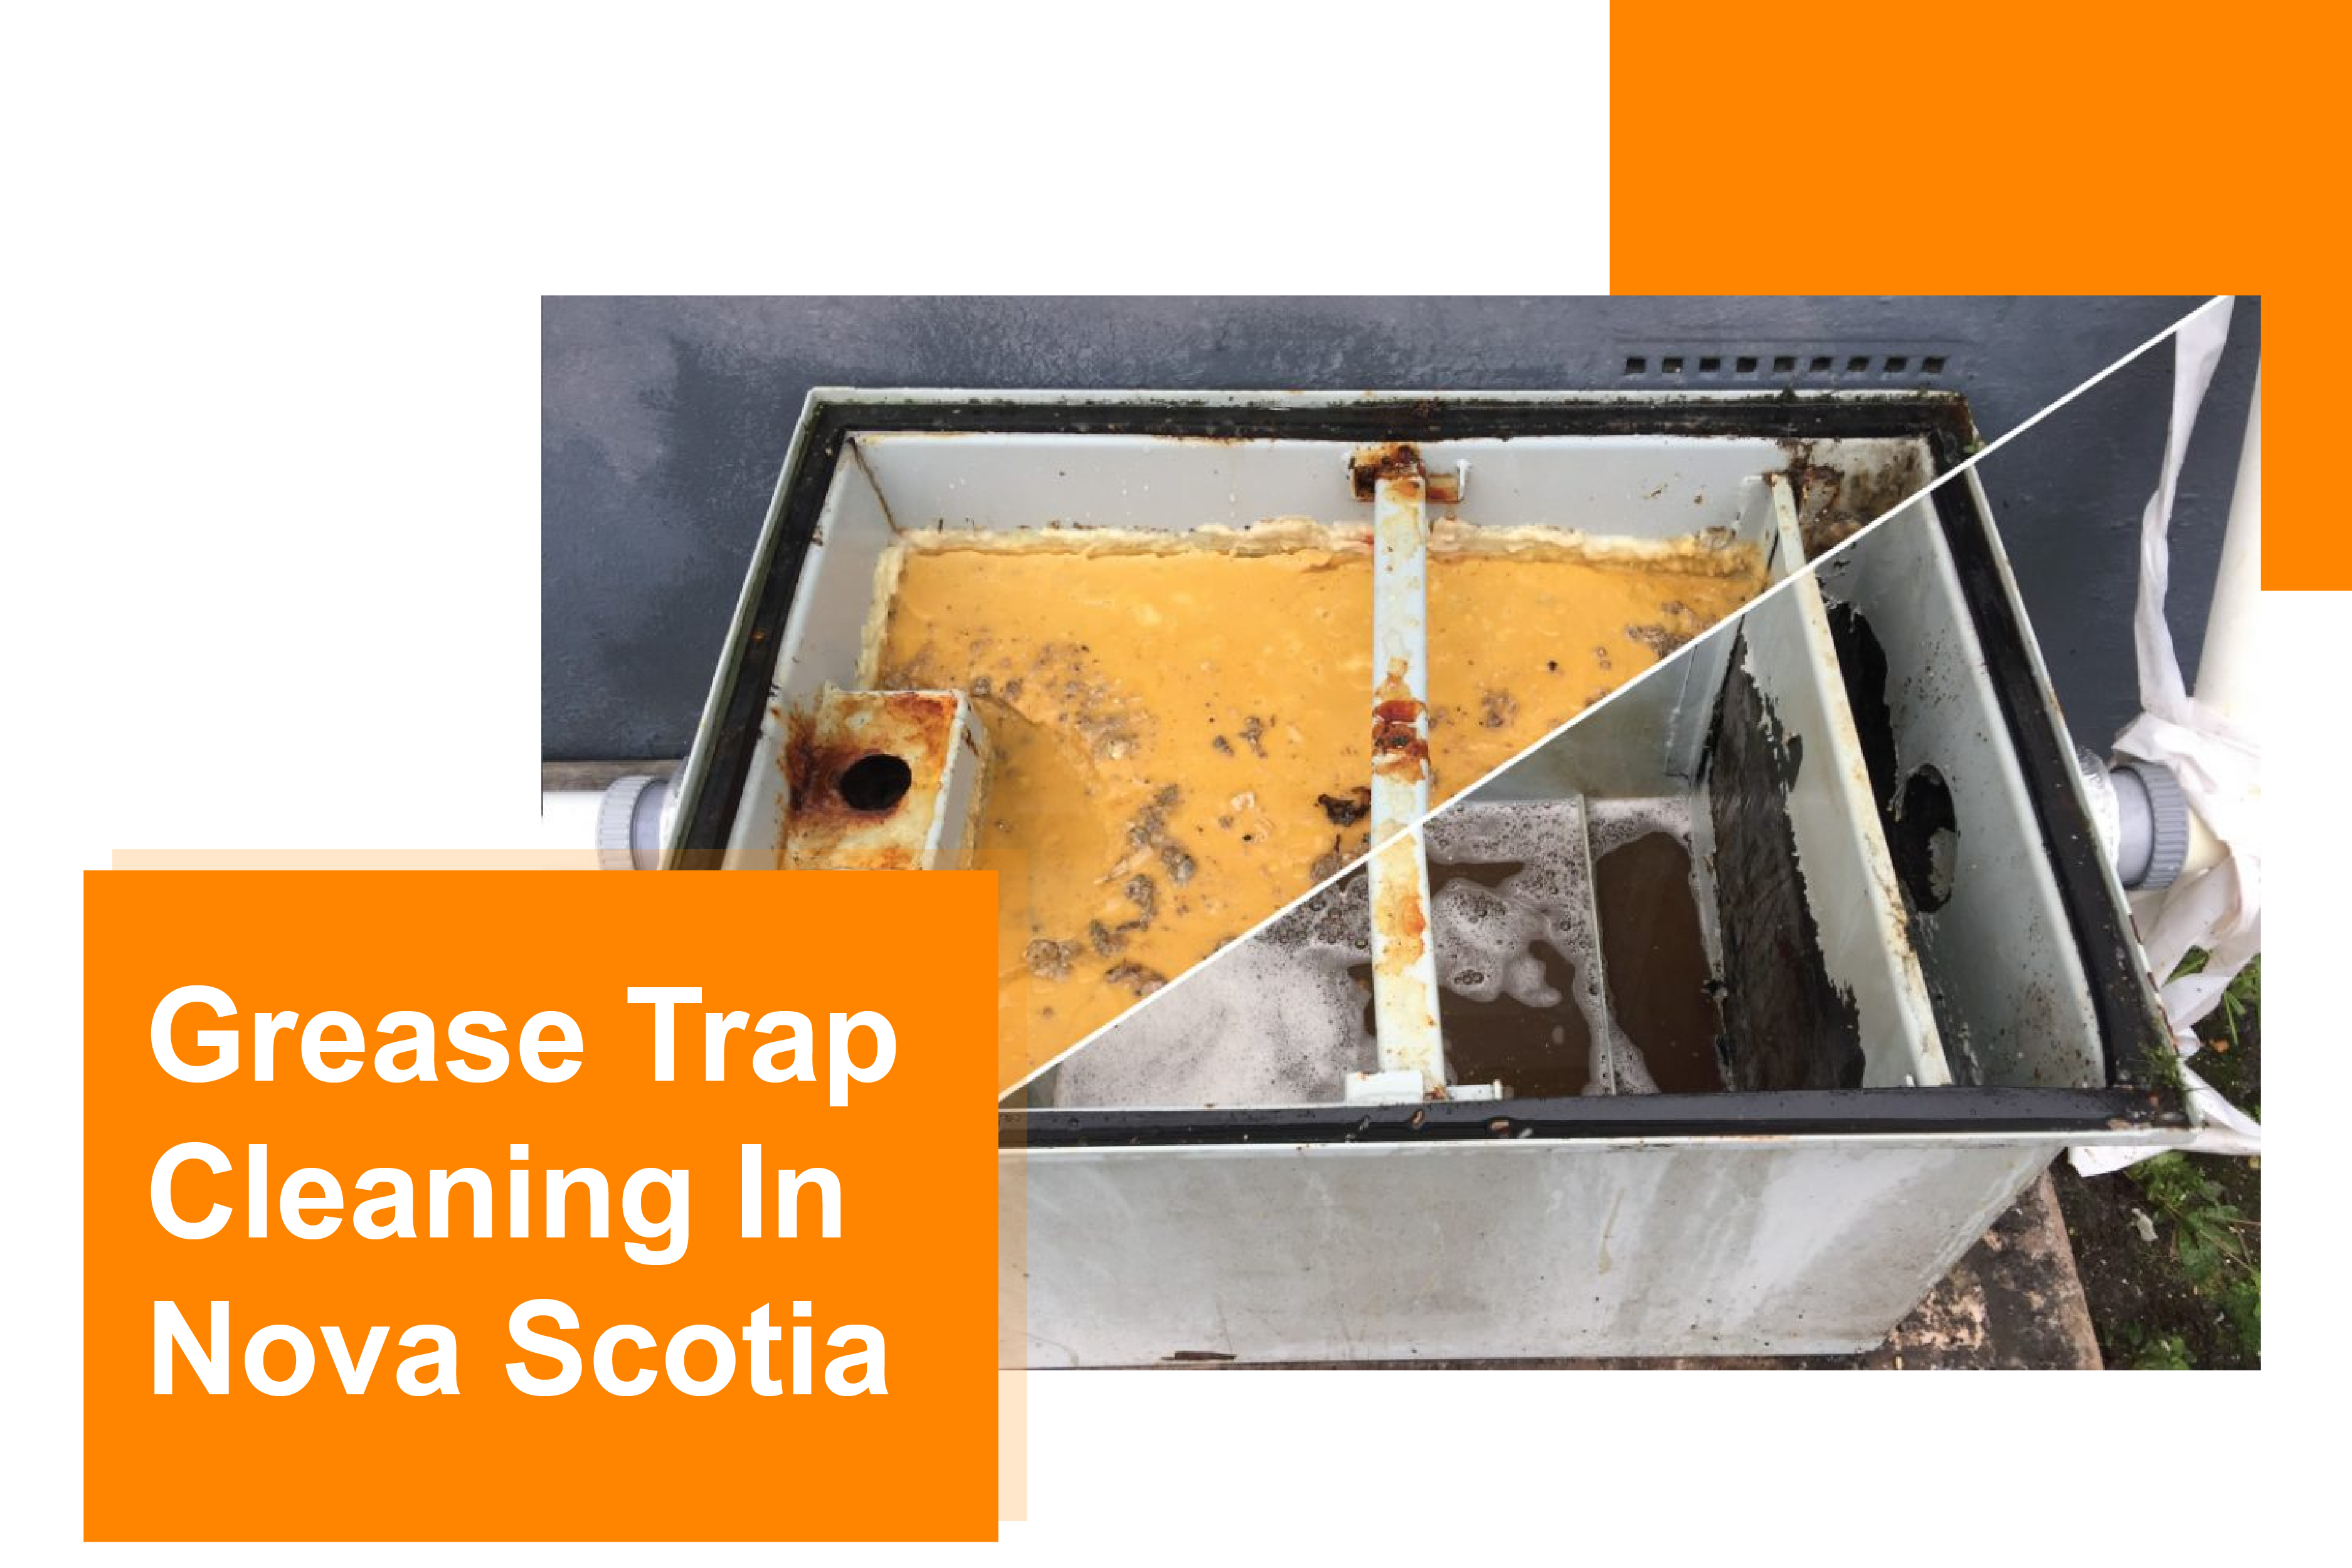 Grease Trap Cleaning in Nova Scotia